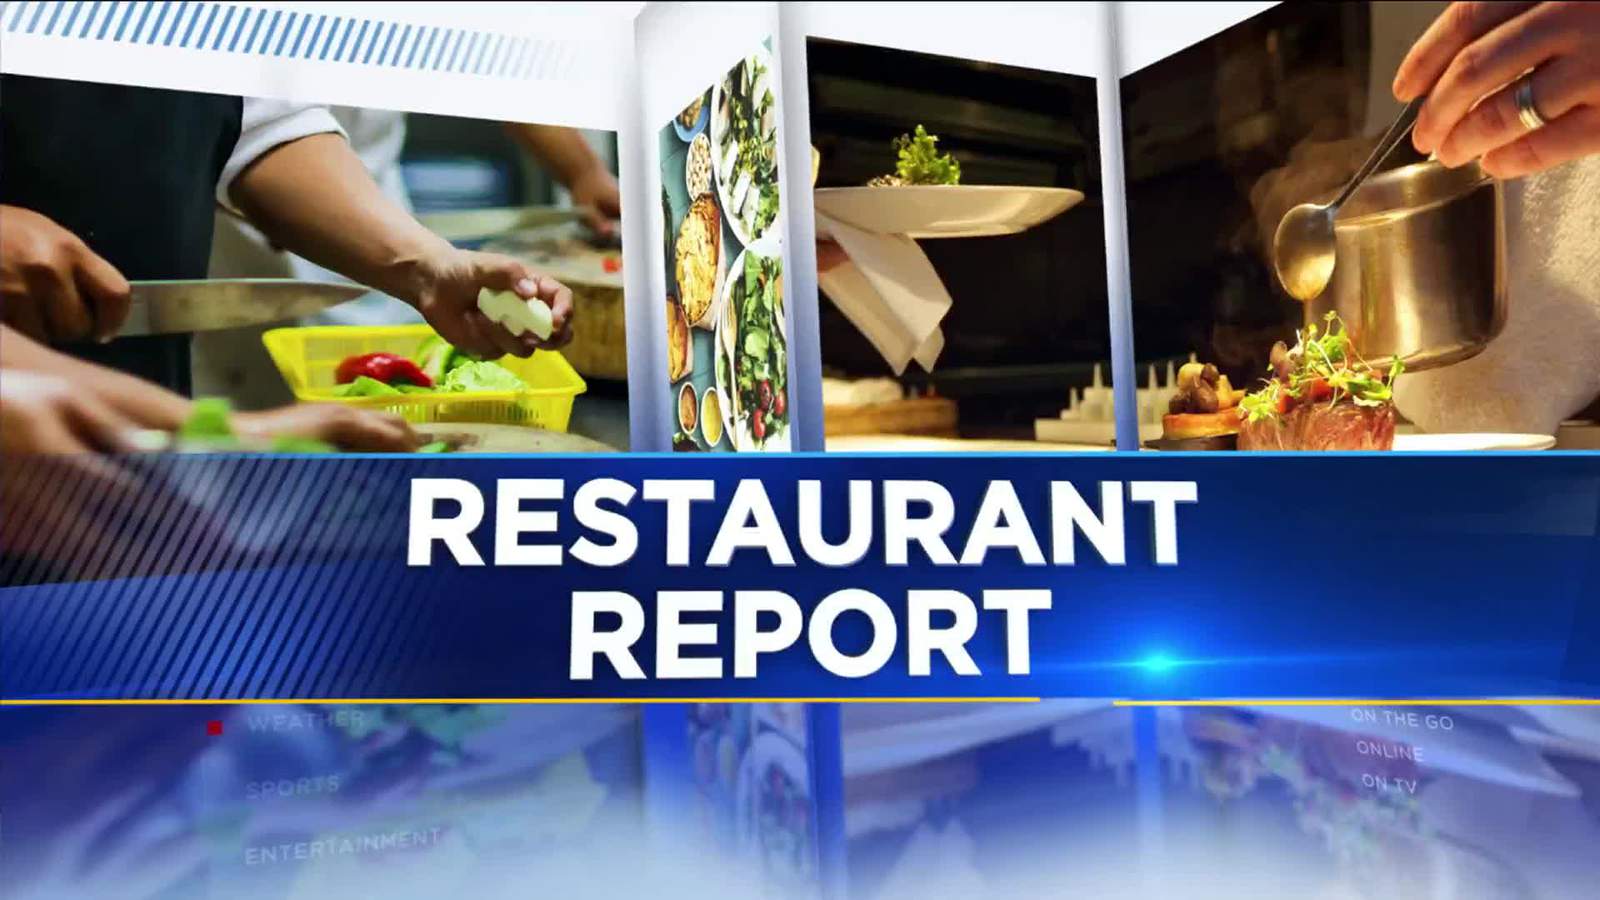 A look at the routine food inspections from some major restaurant chains